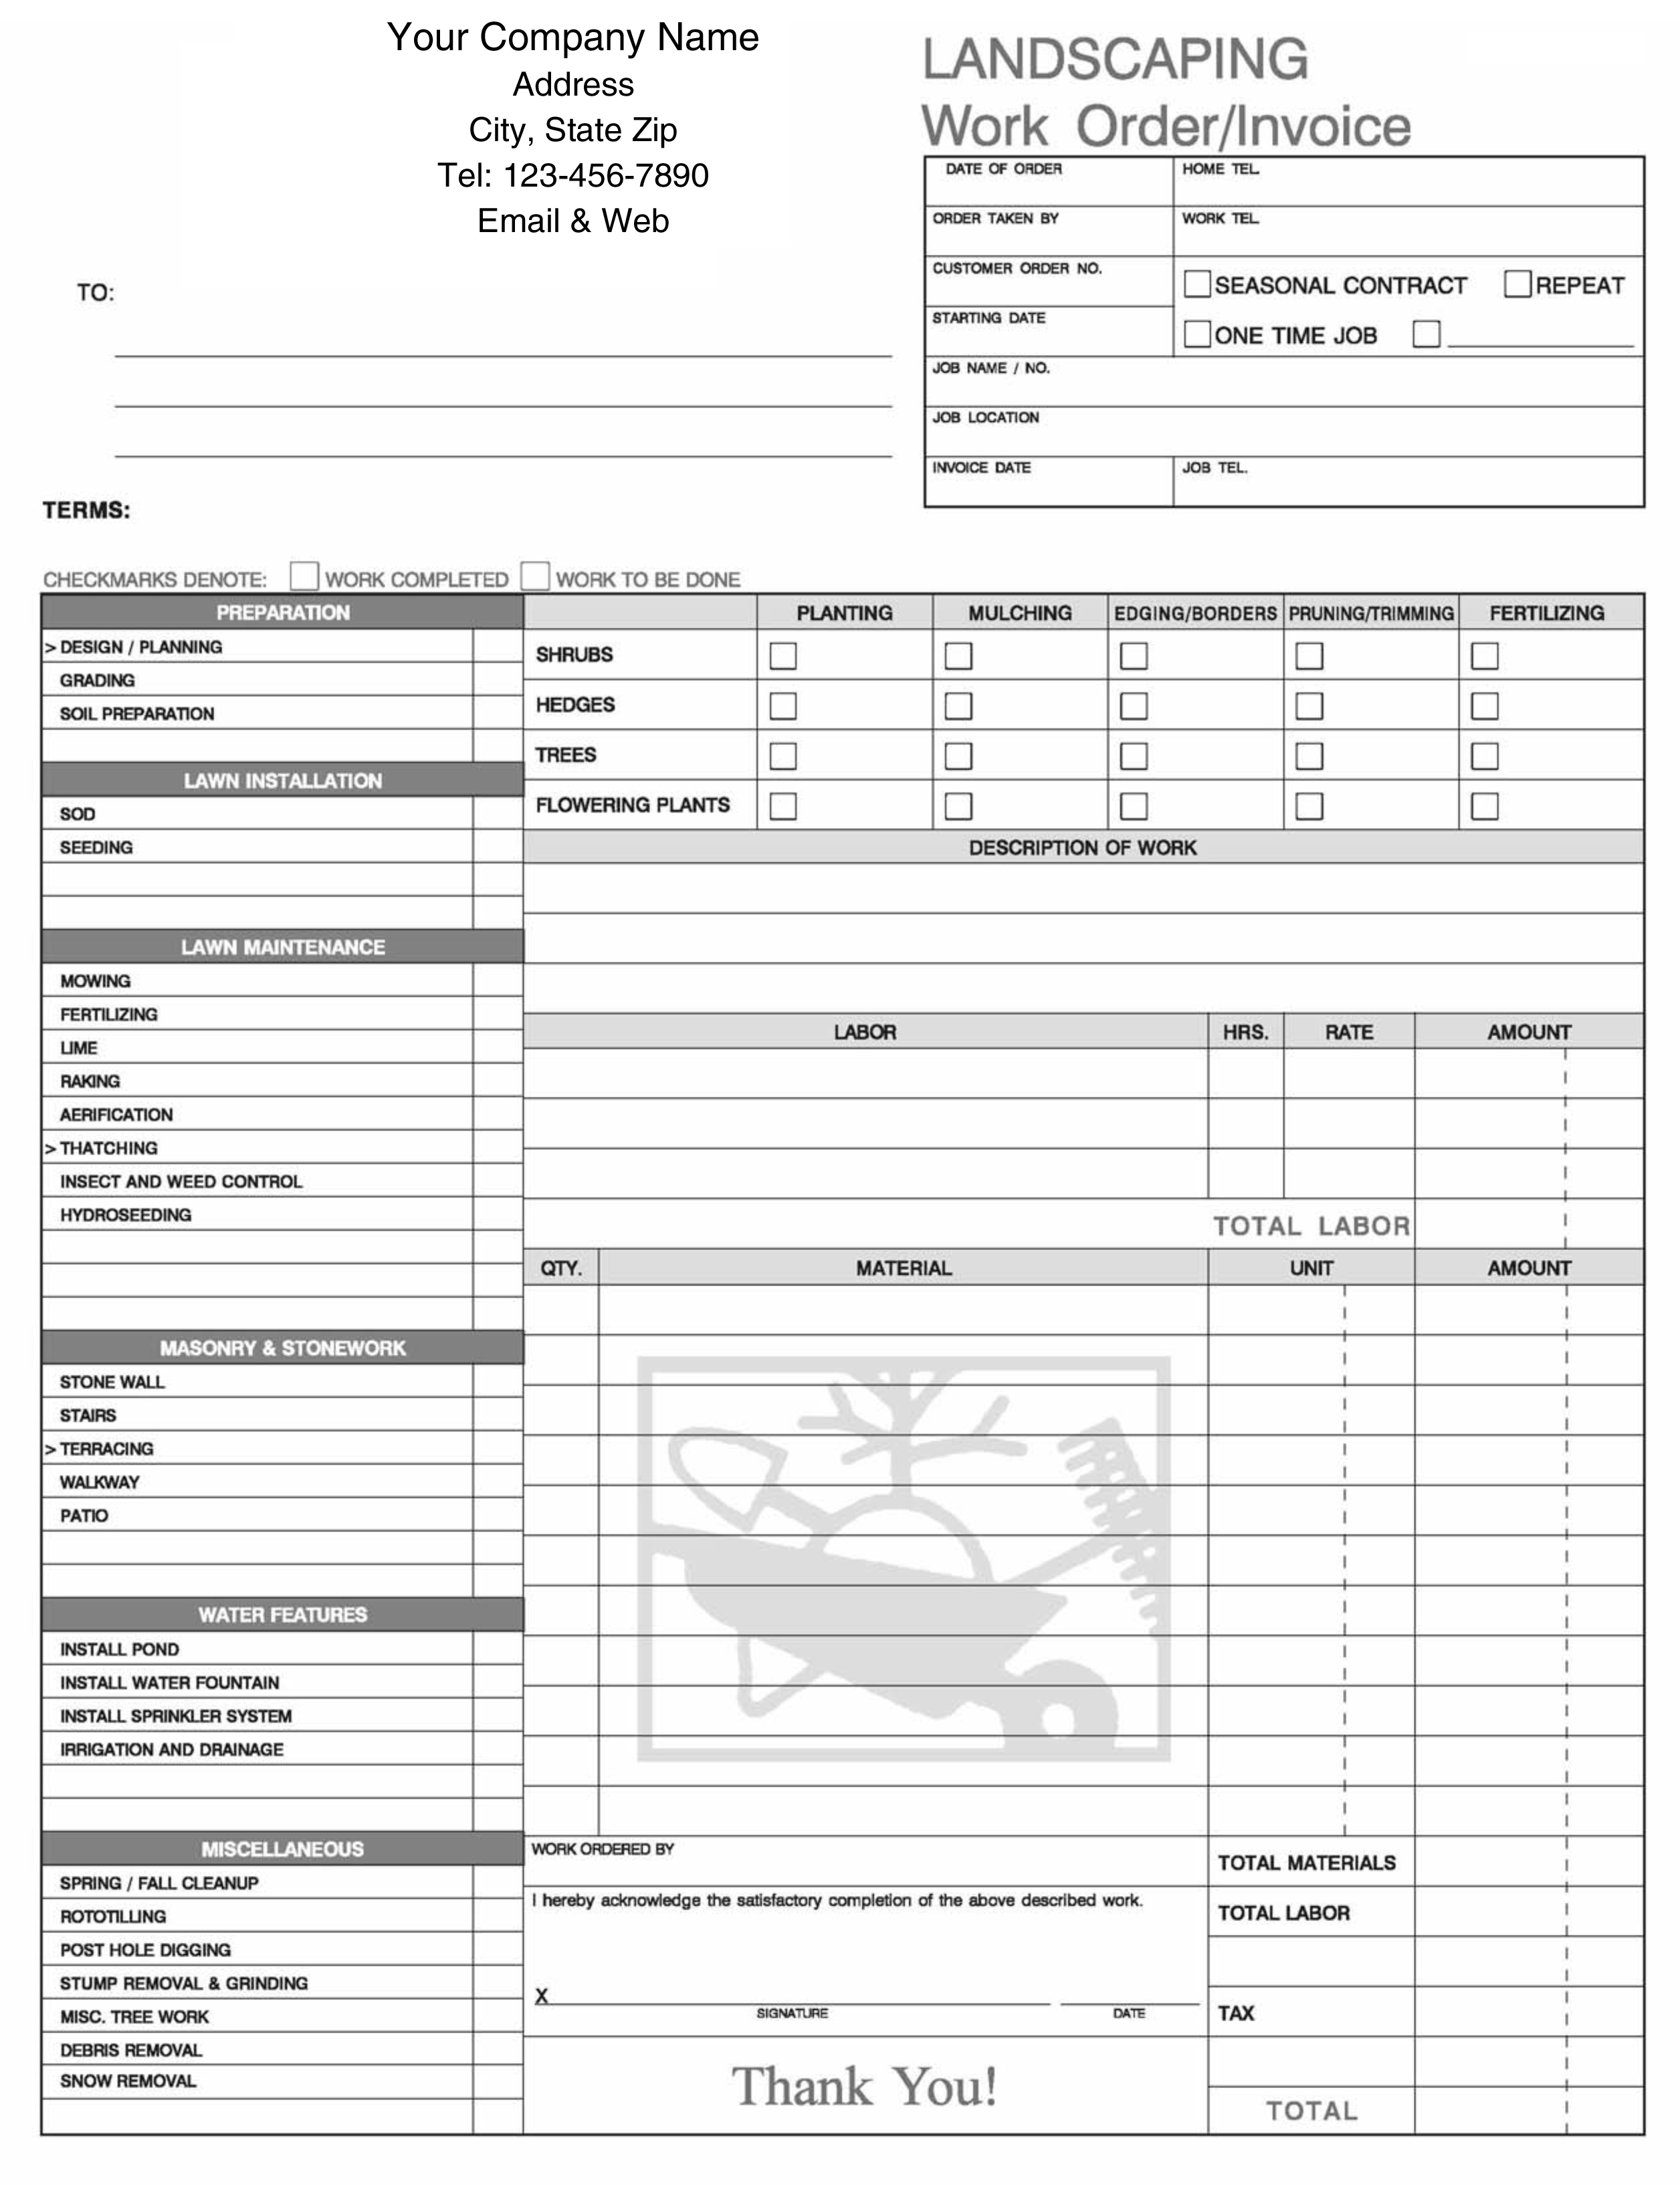 landscaping invoice template landscaping invoice form designing 2512 X 3267